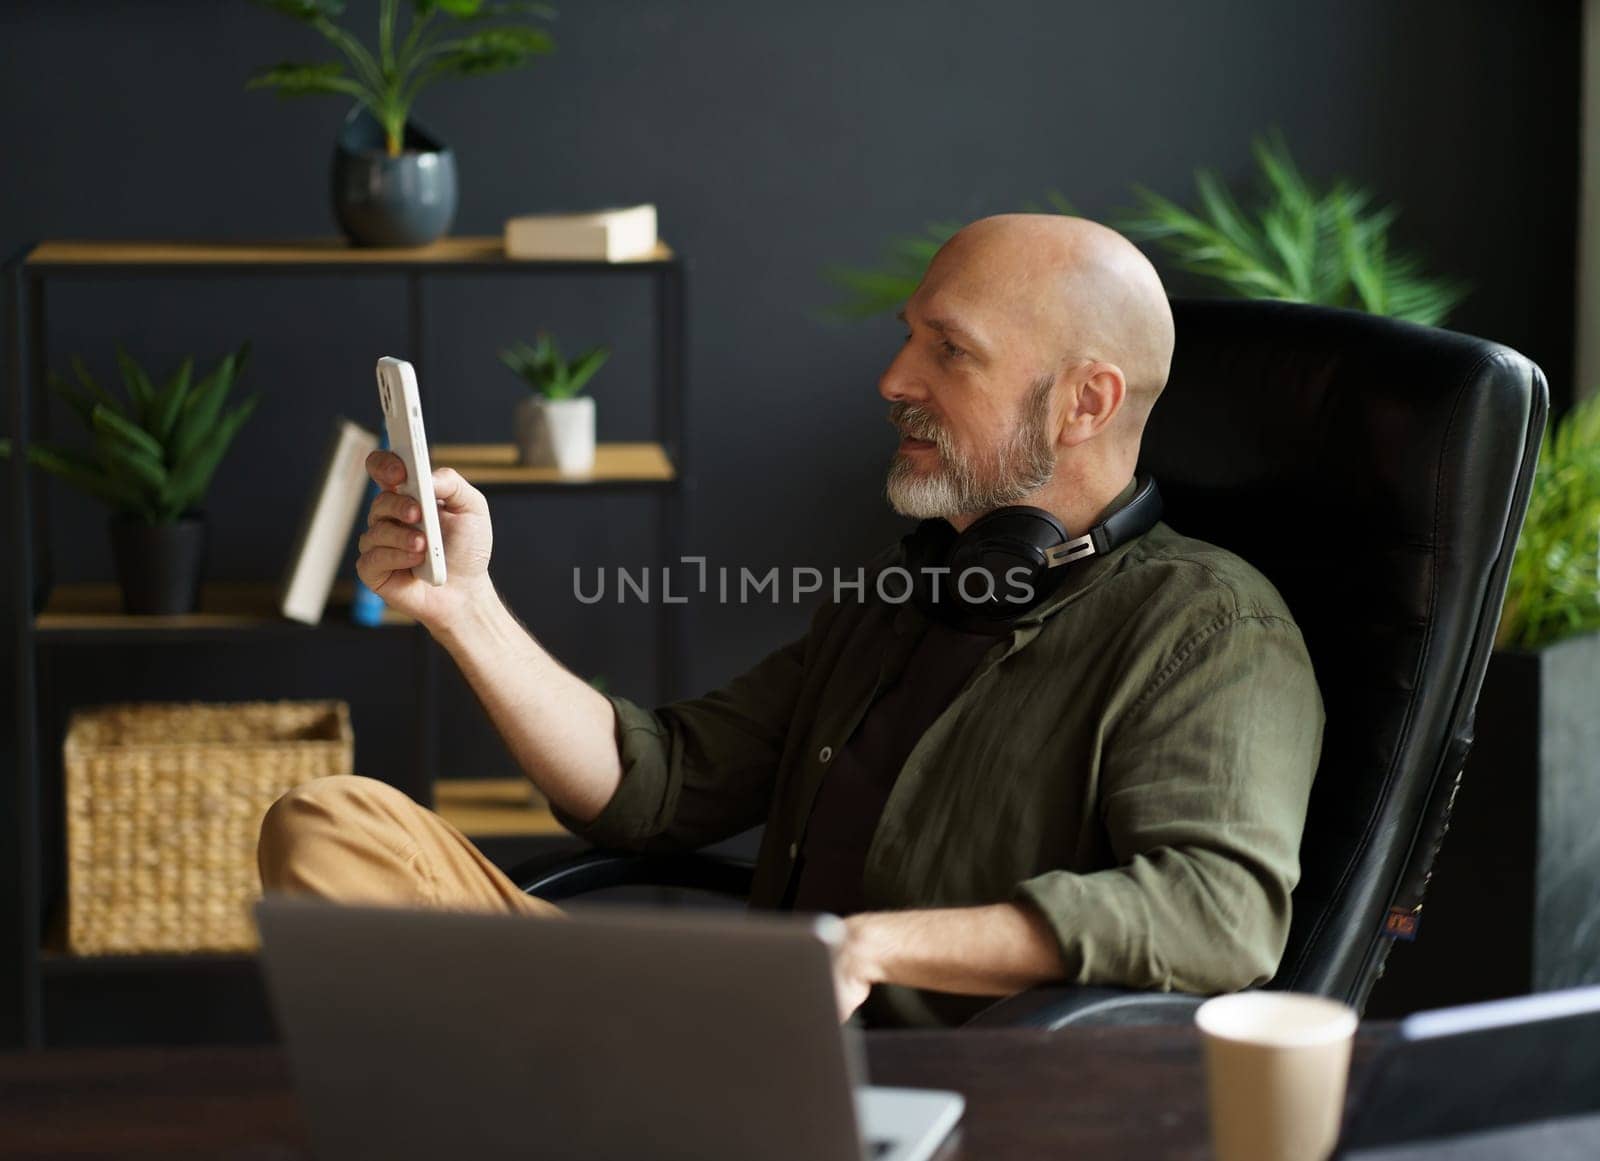 Smart and tech-savvy mid-aged man sits in chair at desk, engrossed in screen of phone. With bald head, silver beard, and air of handsomeness, multitasks, balancing phone, laptop, and cup of coffee. High quality photo